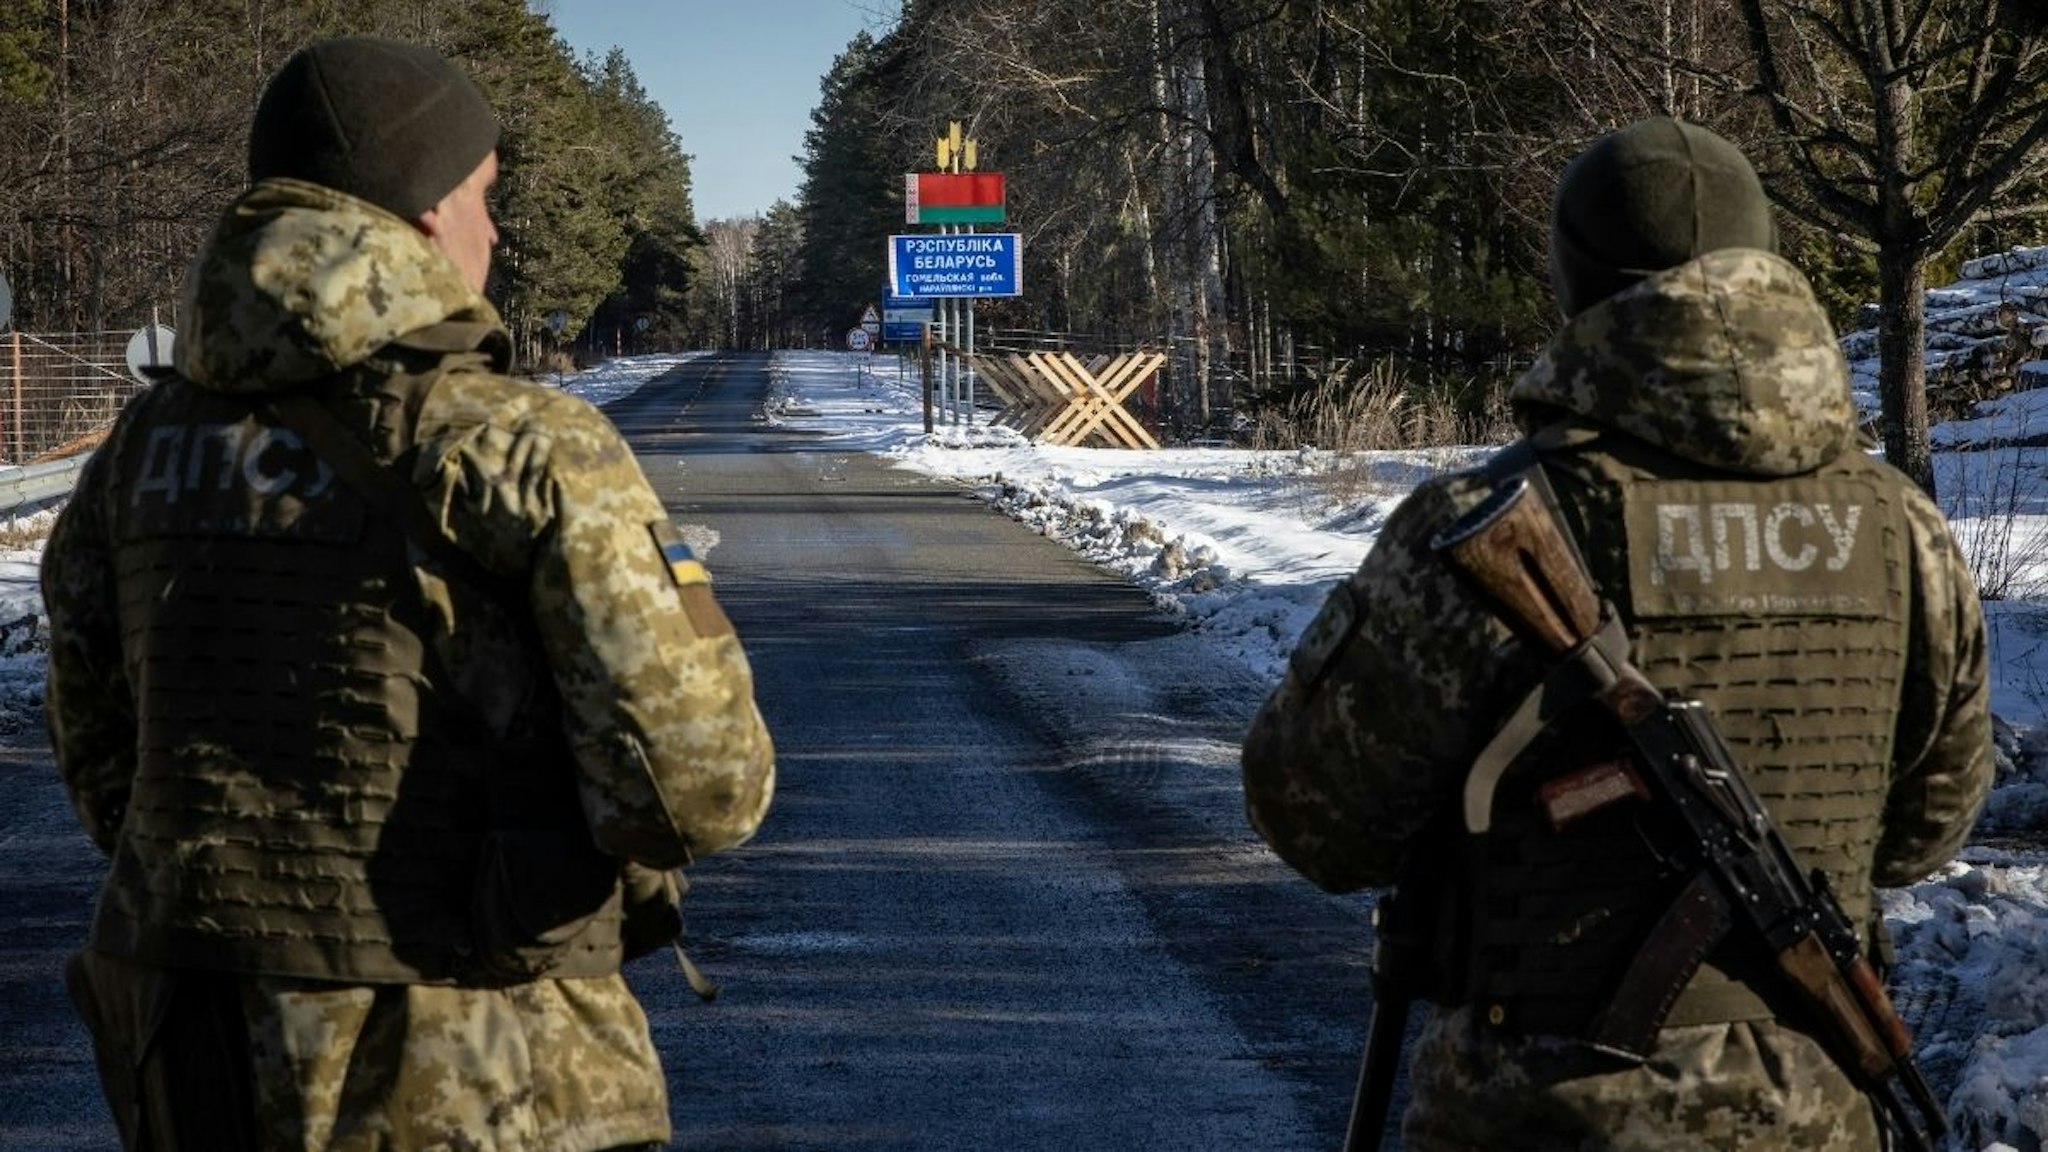 Members of the Ukrainian State Border Guard stand watch at the border crossing between Ukraine and Belarus on February 13, 2022 in Vilcha, Ukraine.